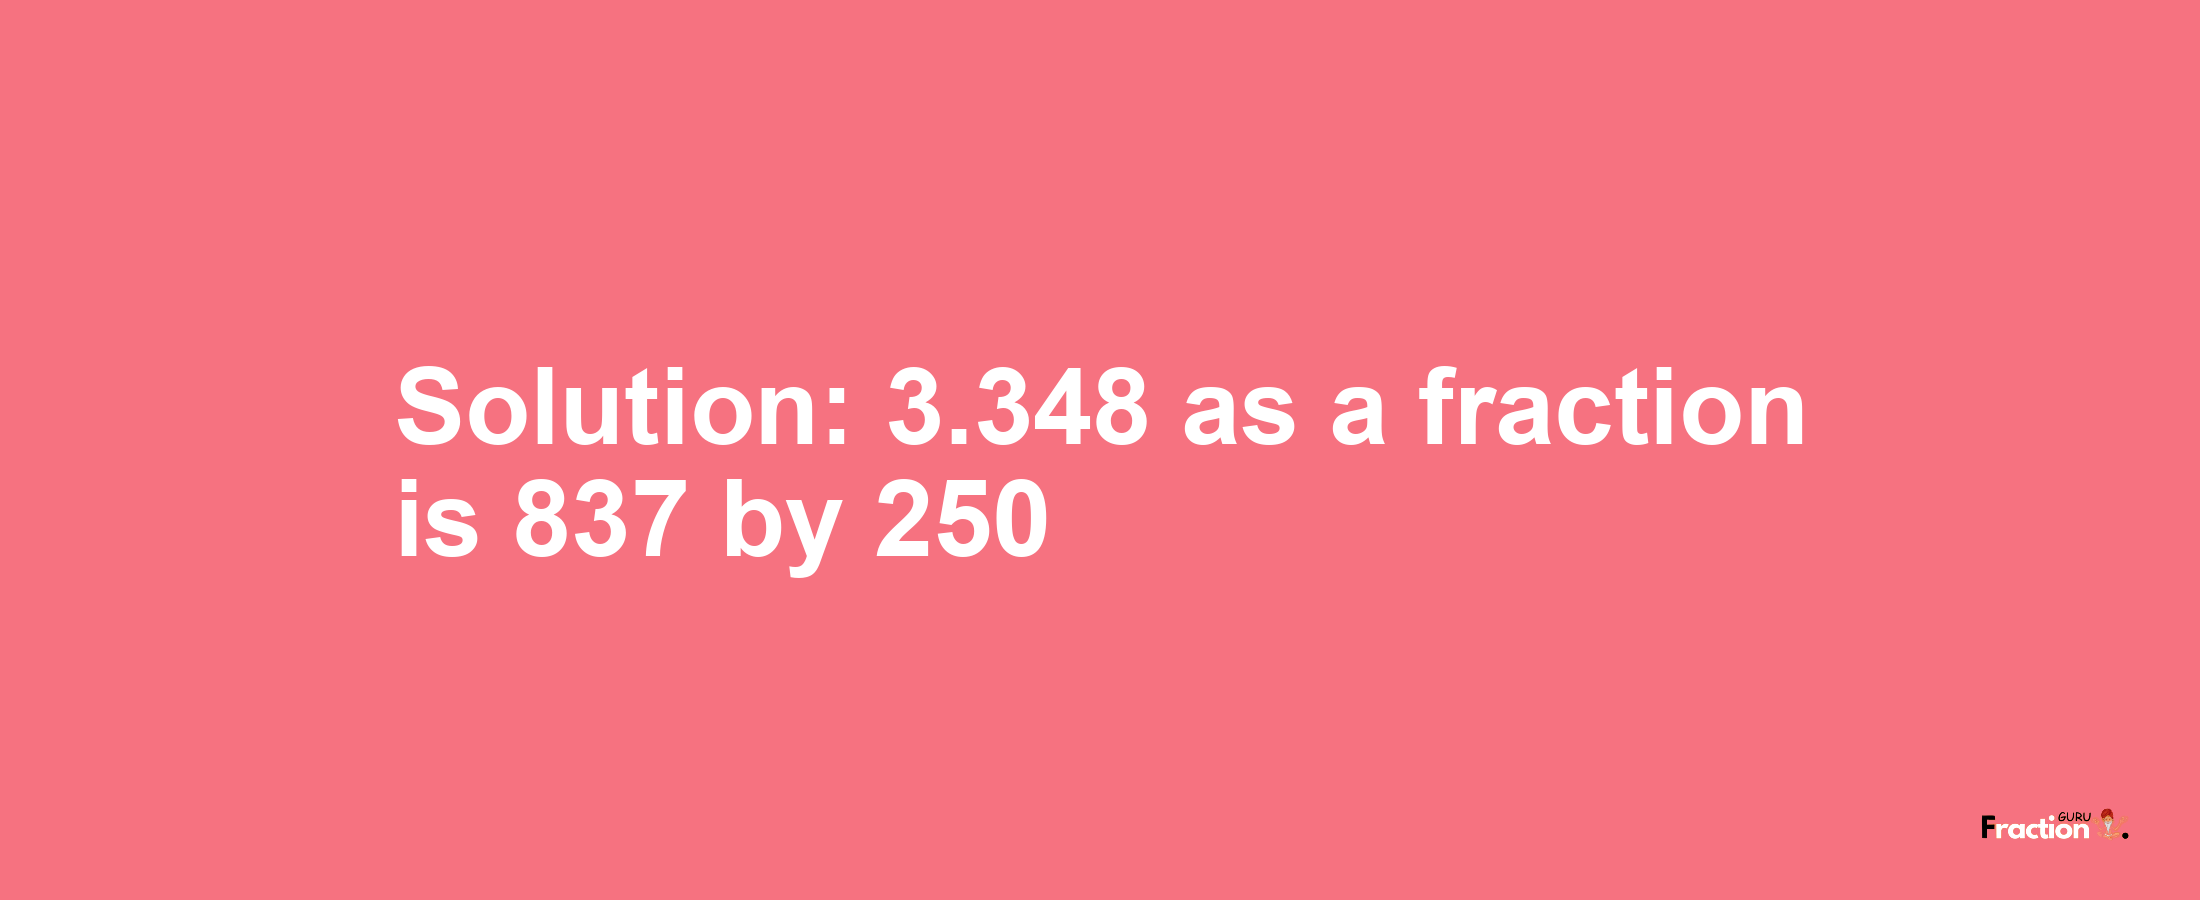 Solution:3.348 as a fraction is 837/250